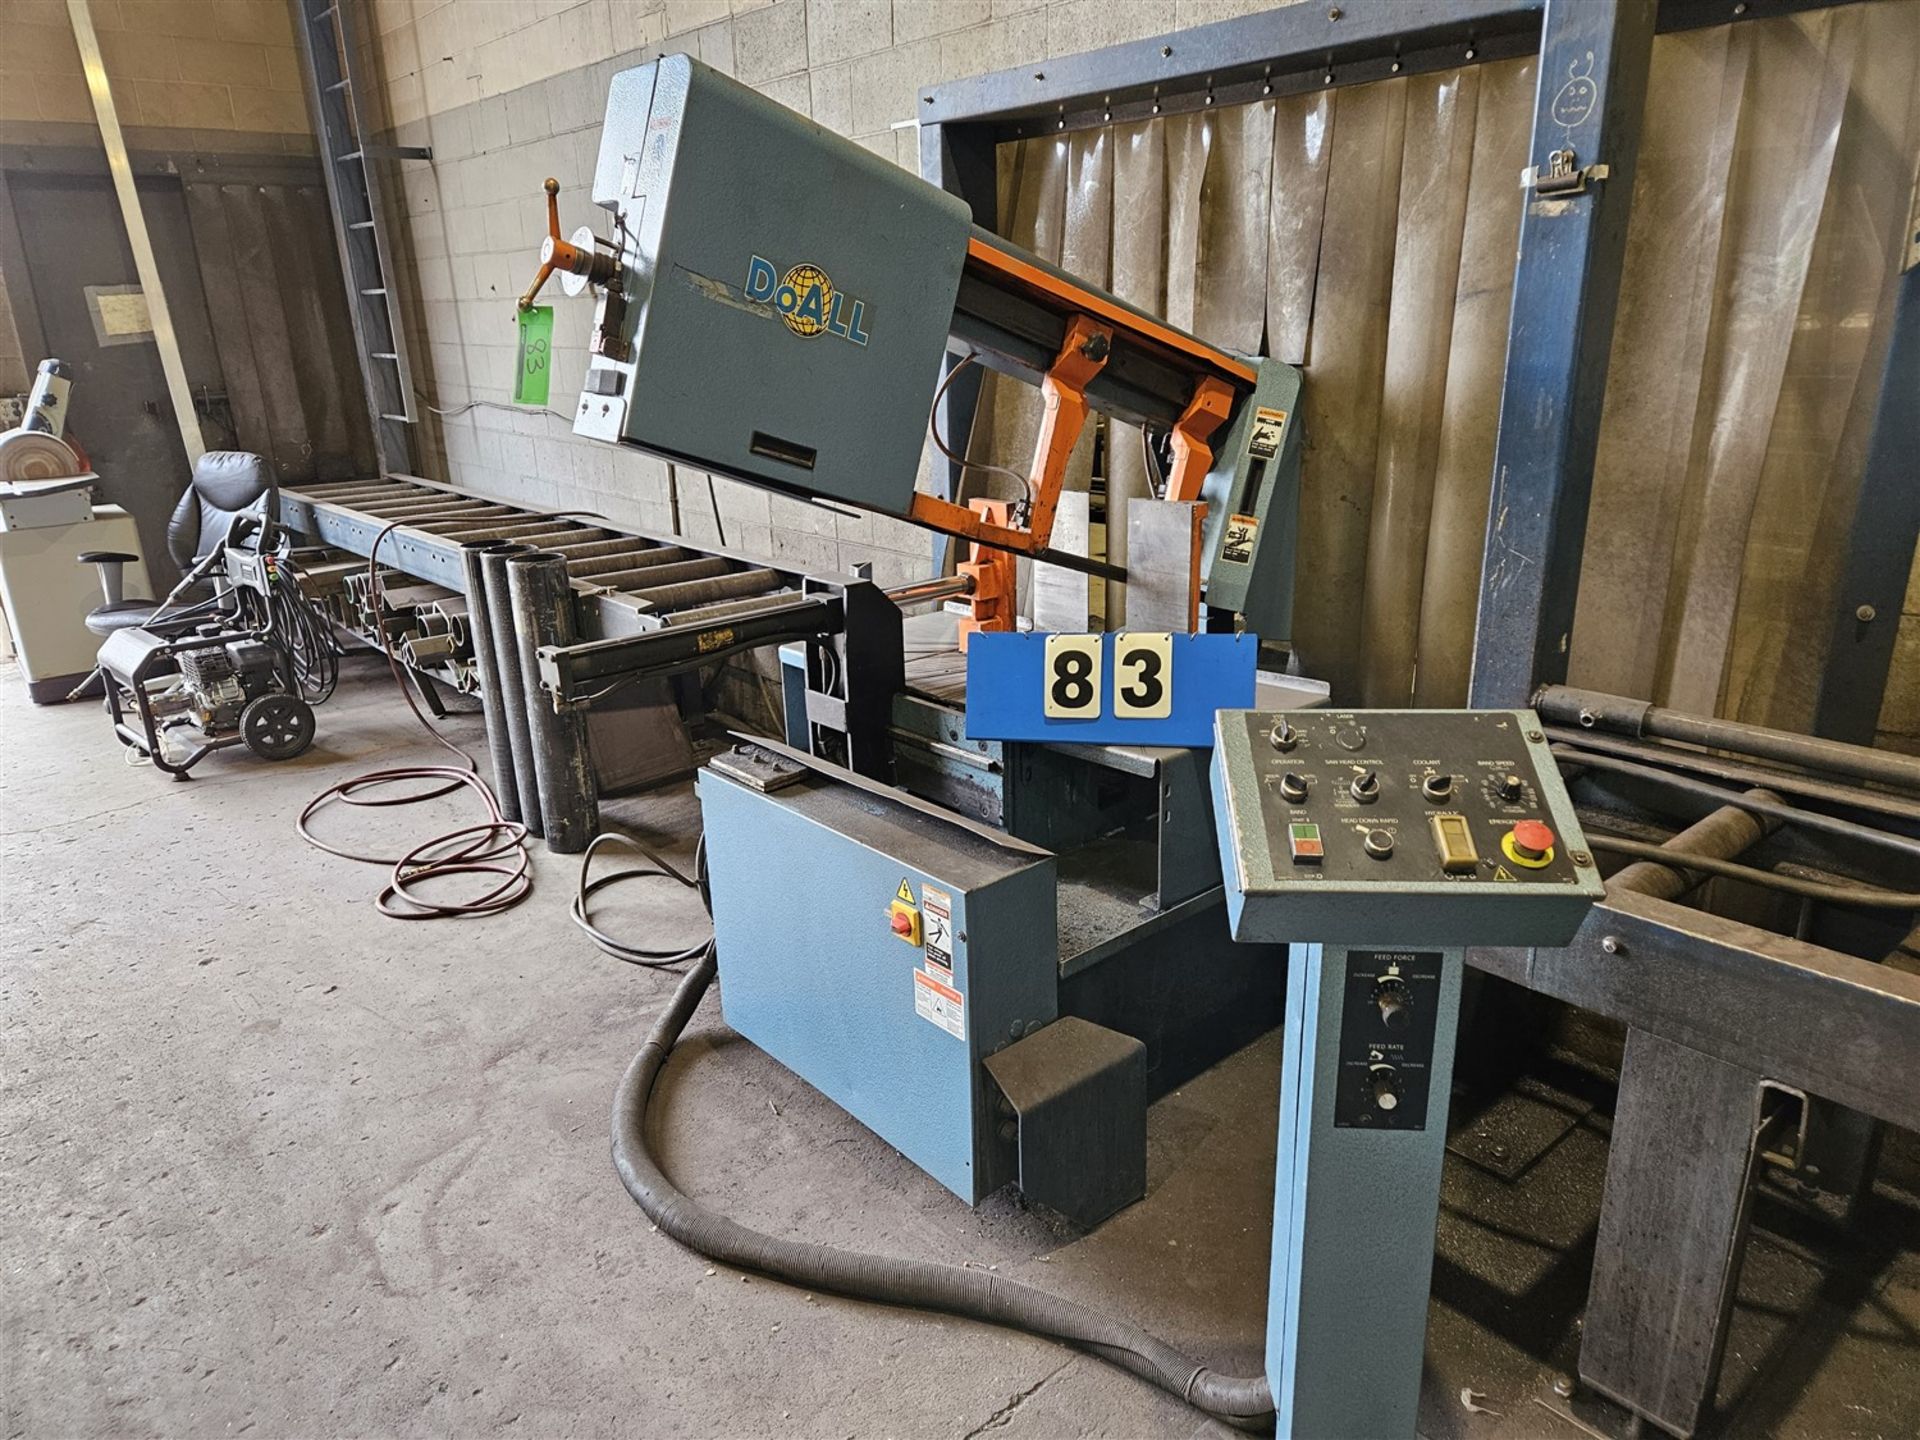 2015 DOALL METAL CUTTING BANDSAW, MODEL 500DS, 460VOLT, 197 IN. BAND LENGTH, S/N 593-15240